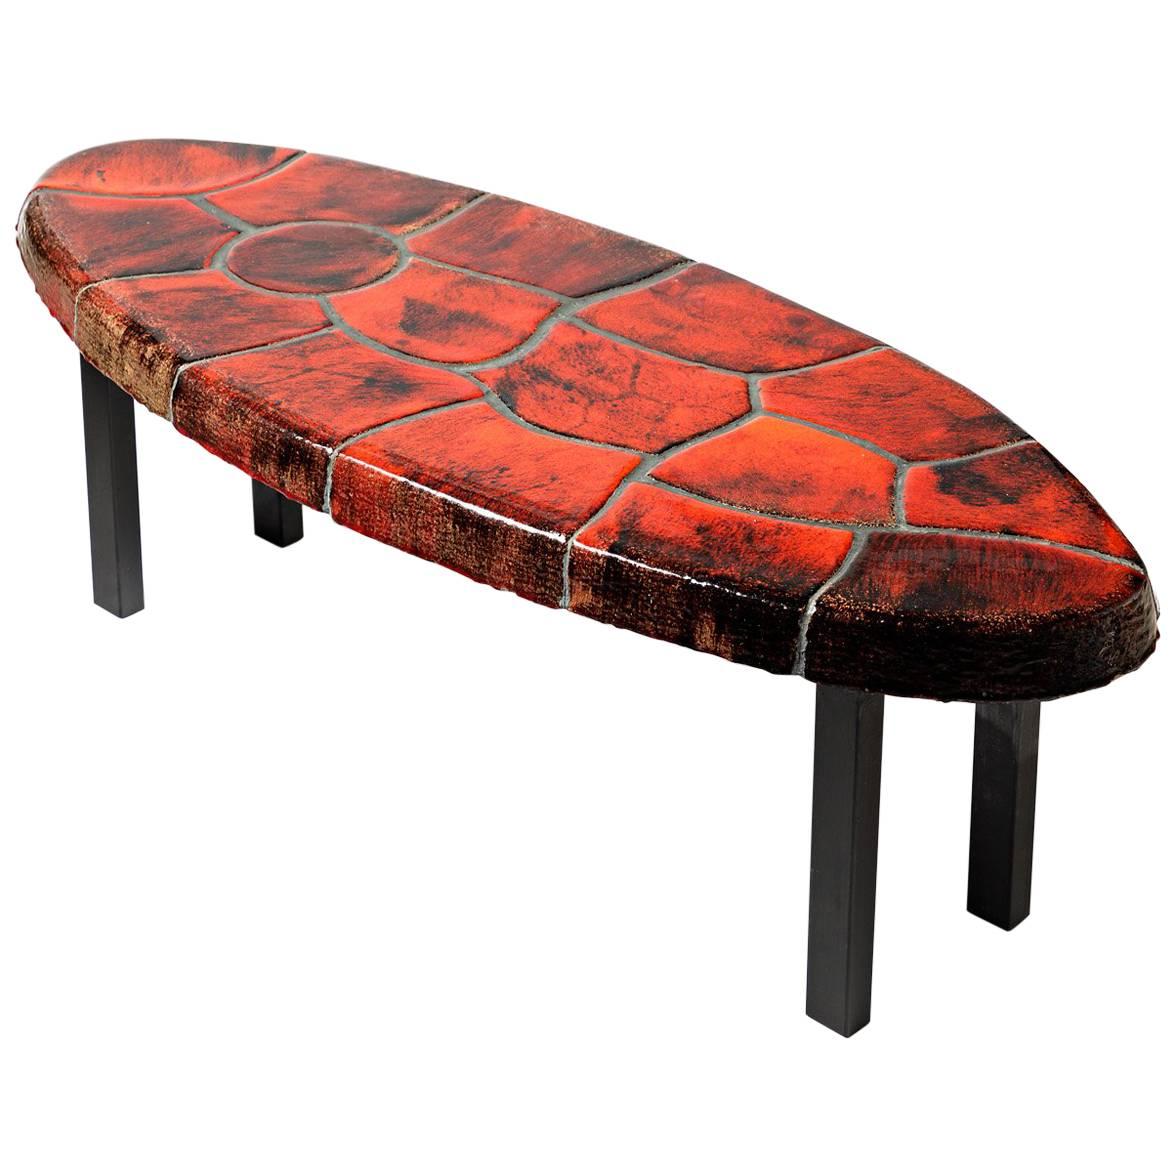 Exceptional Ceramic Low Table circa 1970 with Red Ceramic Glaze For Sale